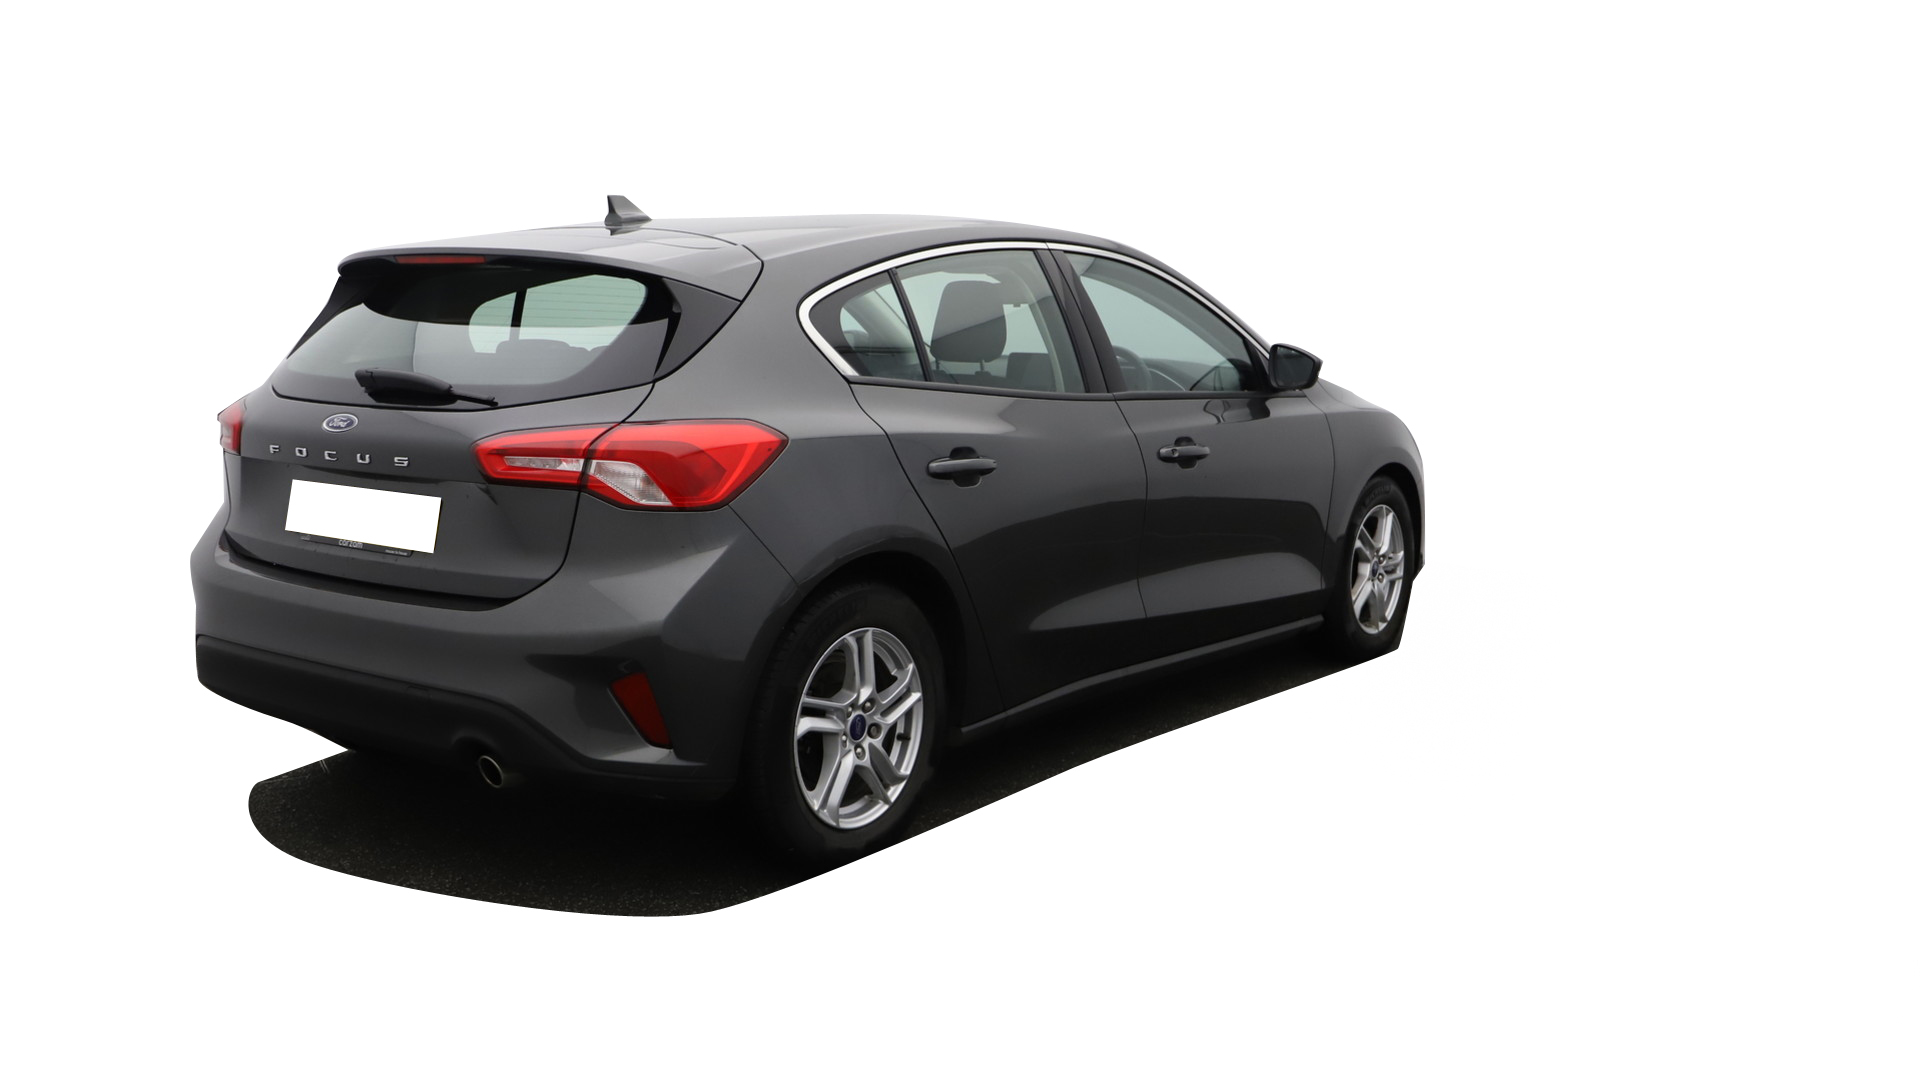 back_ford_focus_asg_leasing_cyprus